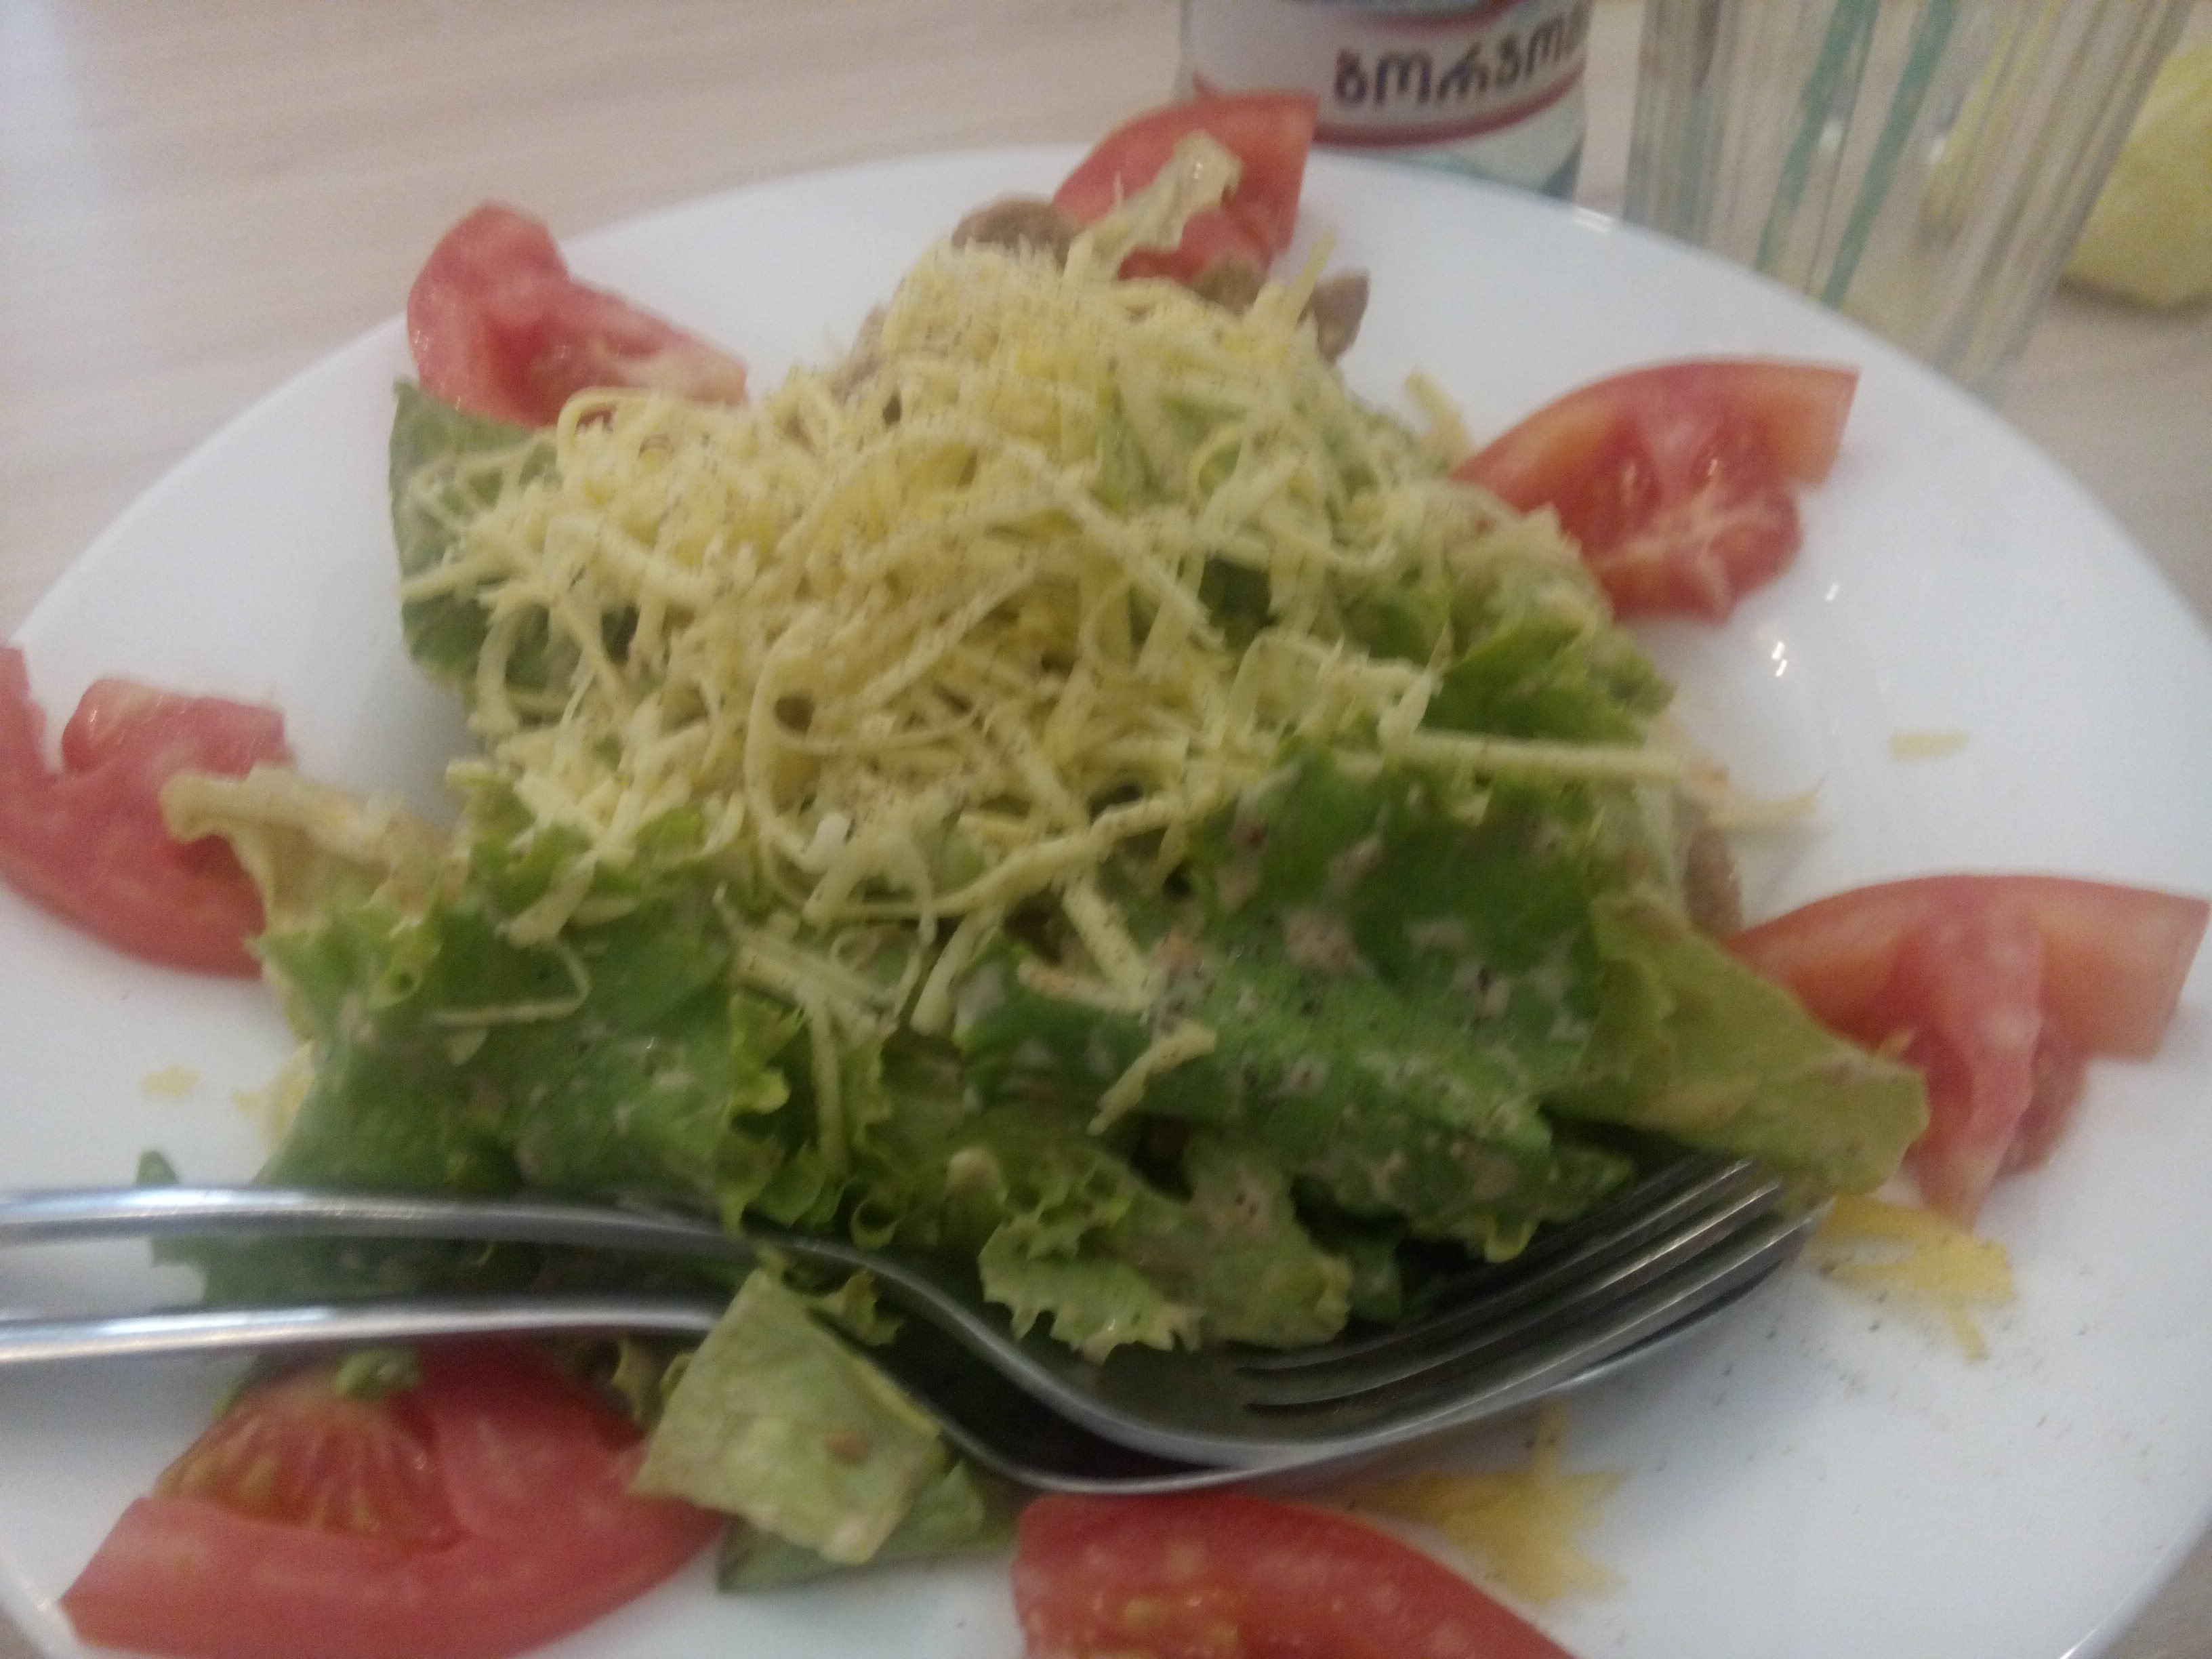 A plate of lettuce with tomato slices fanning out, and not-cheese grated on top